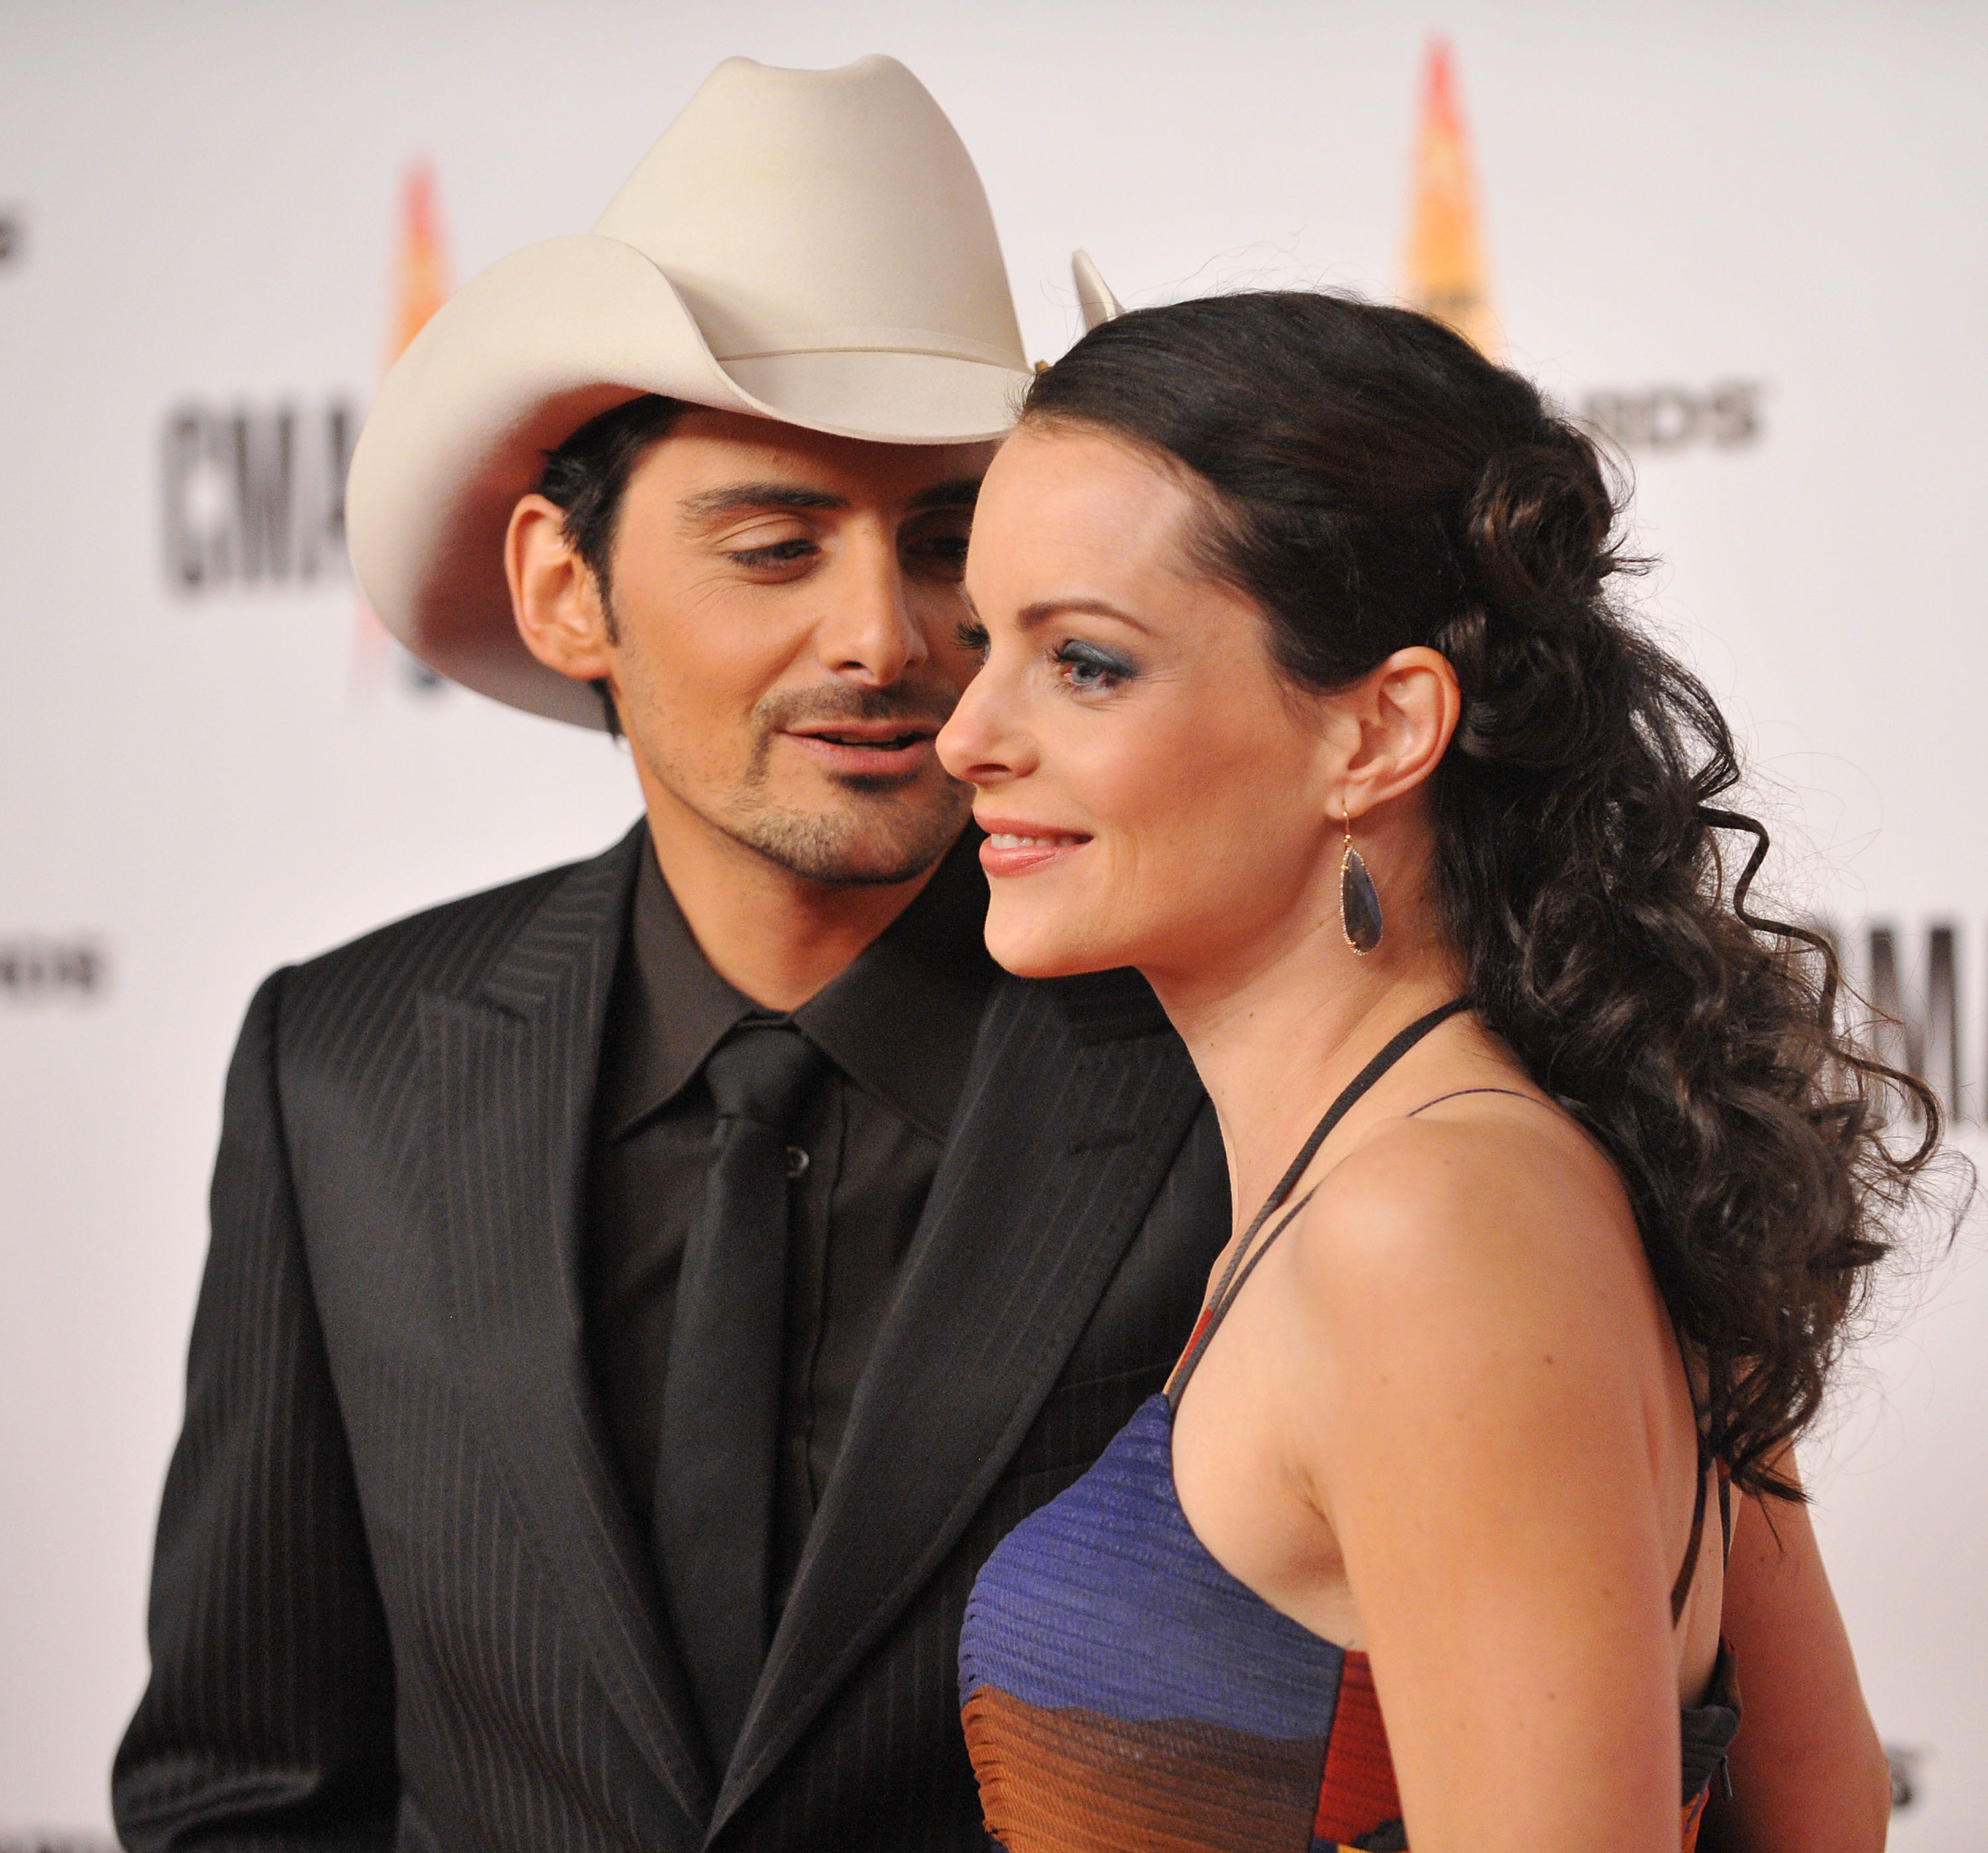 Brad Paisley and Kimberly Williams-Paisley on November 11, 2009 in Nashville, Tennessee | Source: Getty Images